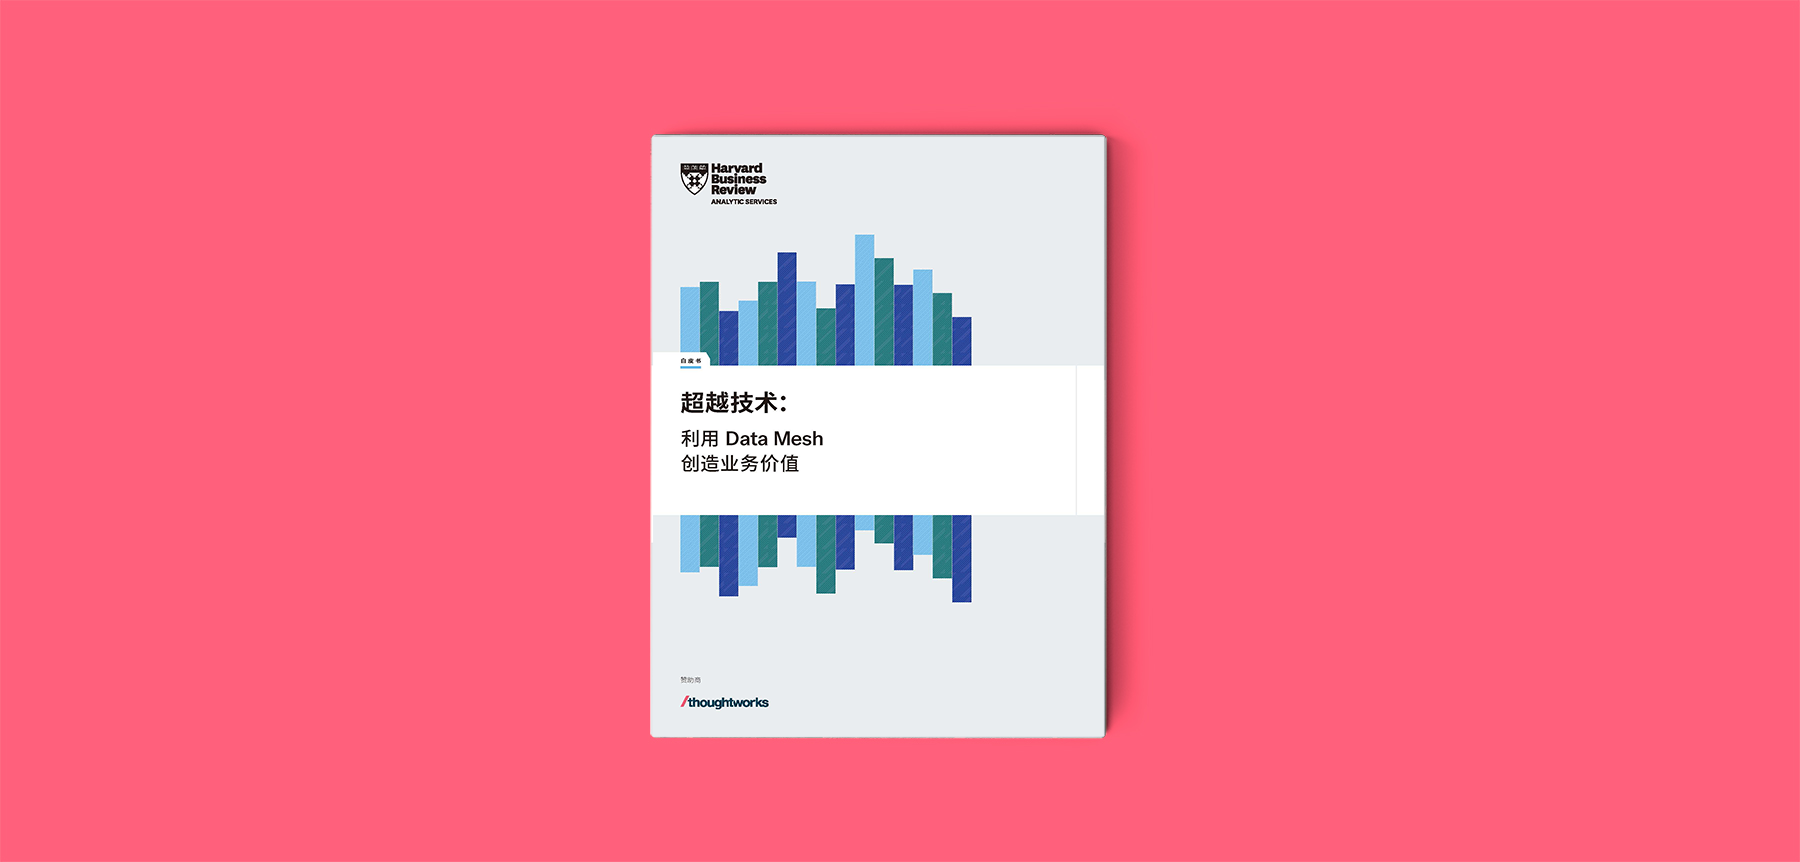 Beyond Technology white paper cover